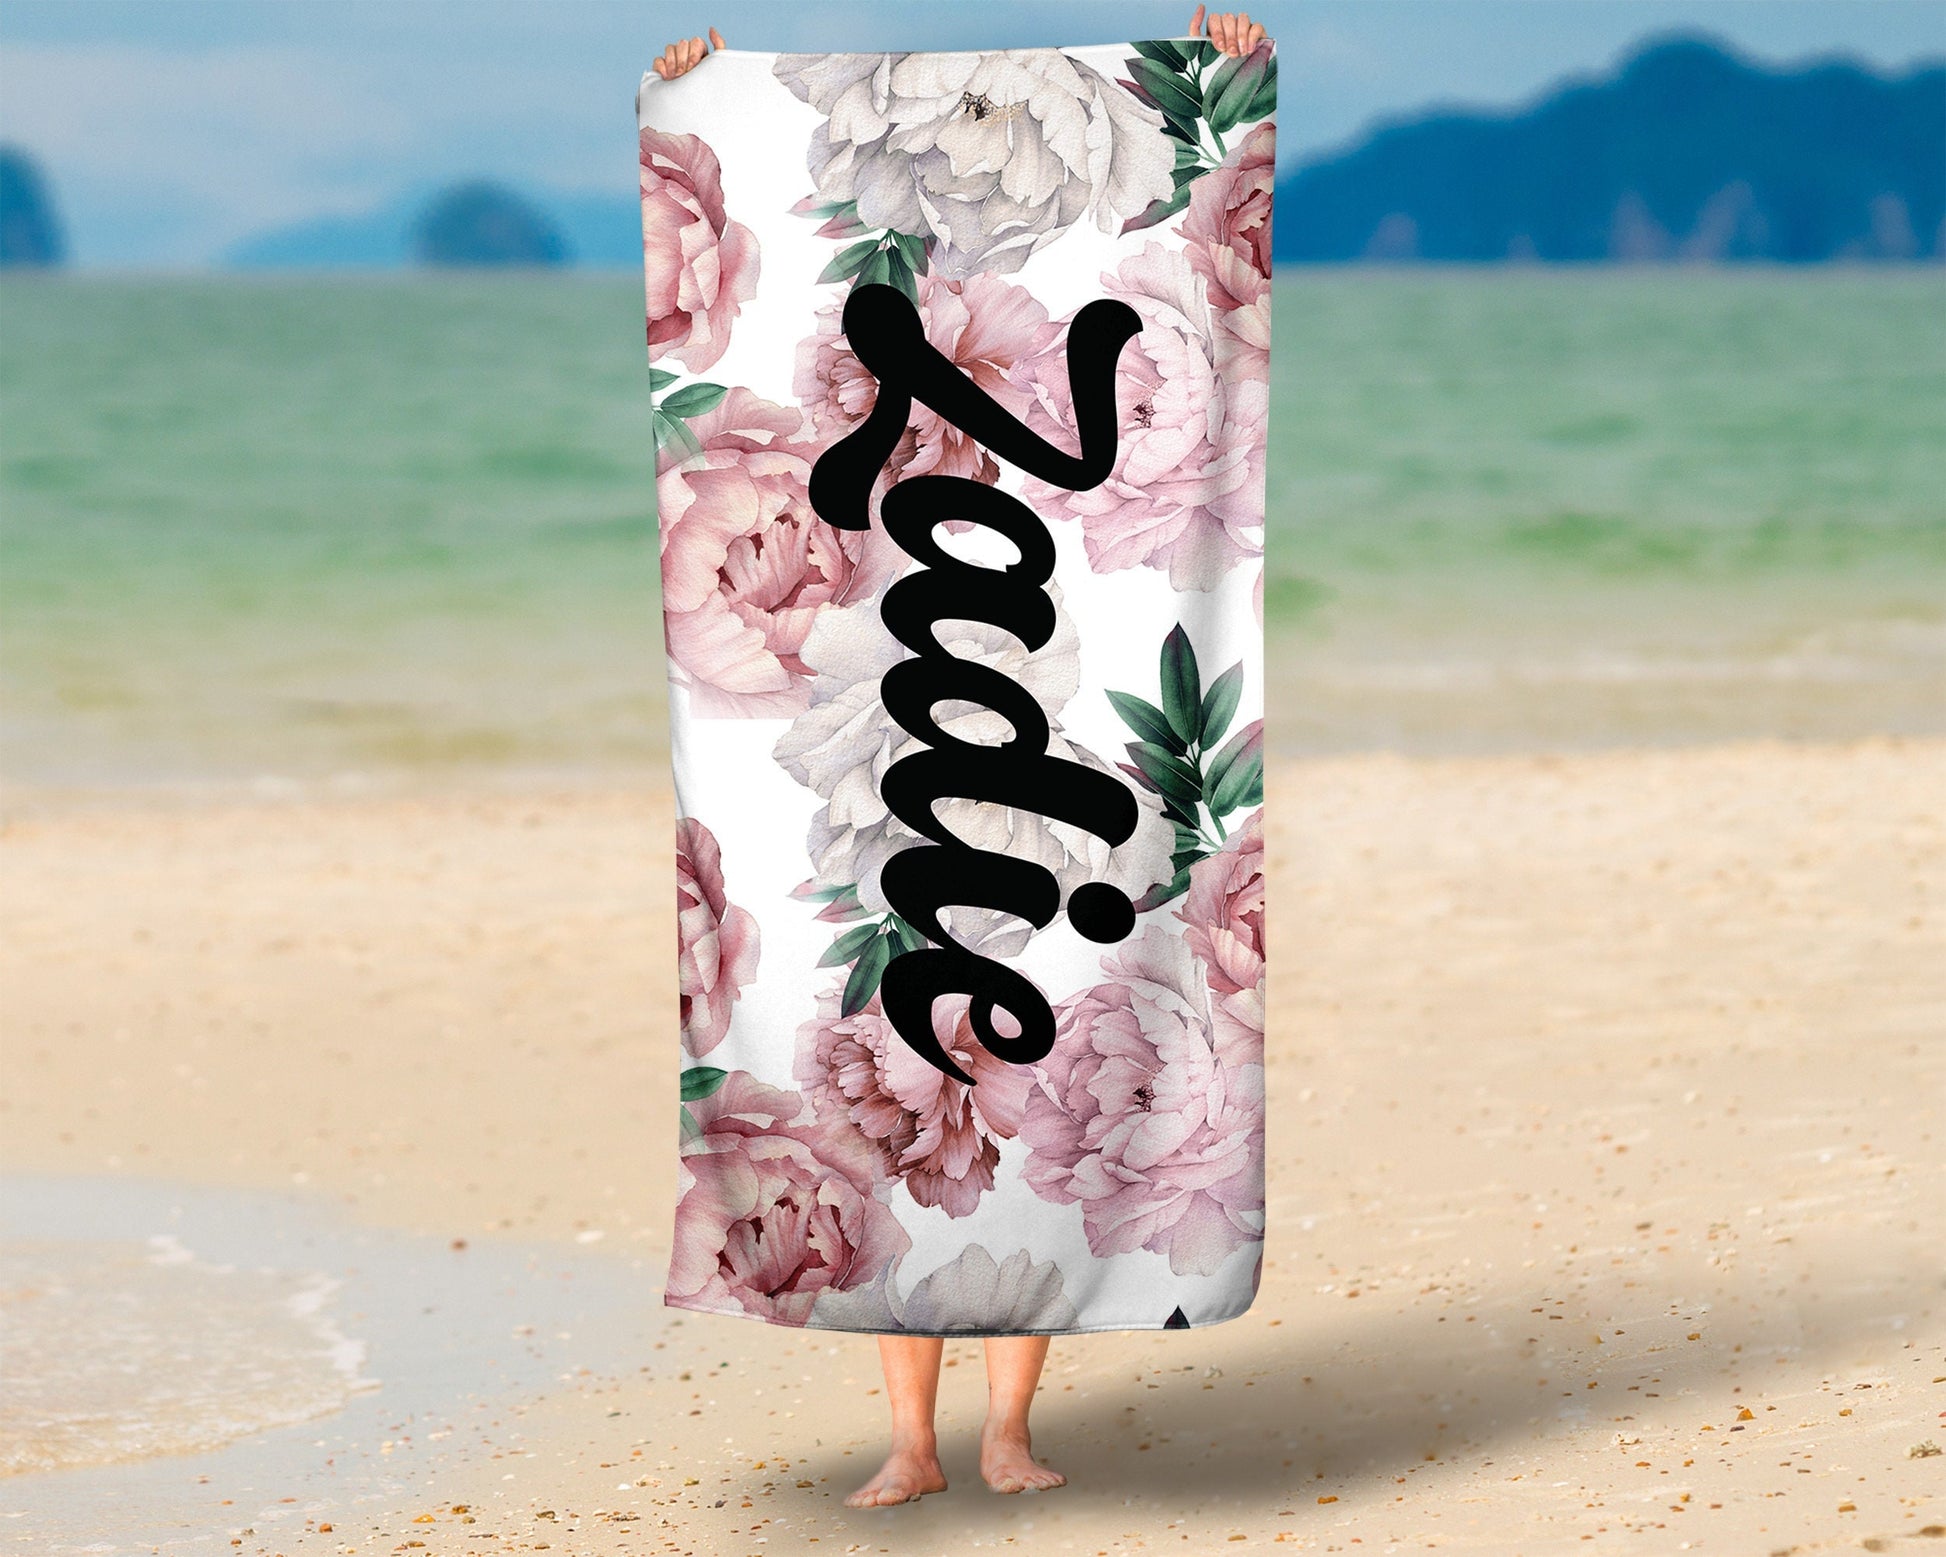 Floral Personalized Beach Towel Girl Custom Pool Towel Personalized Name Birthday Party Favor Pool Party Vacation Bachelorette Birthday Gift